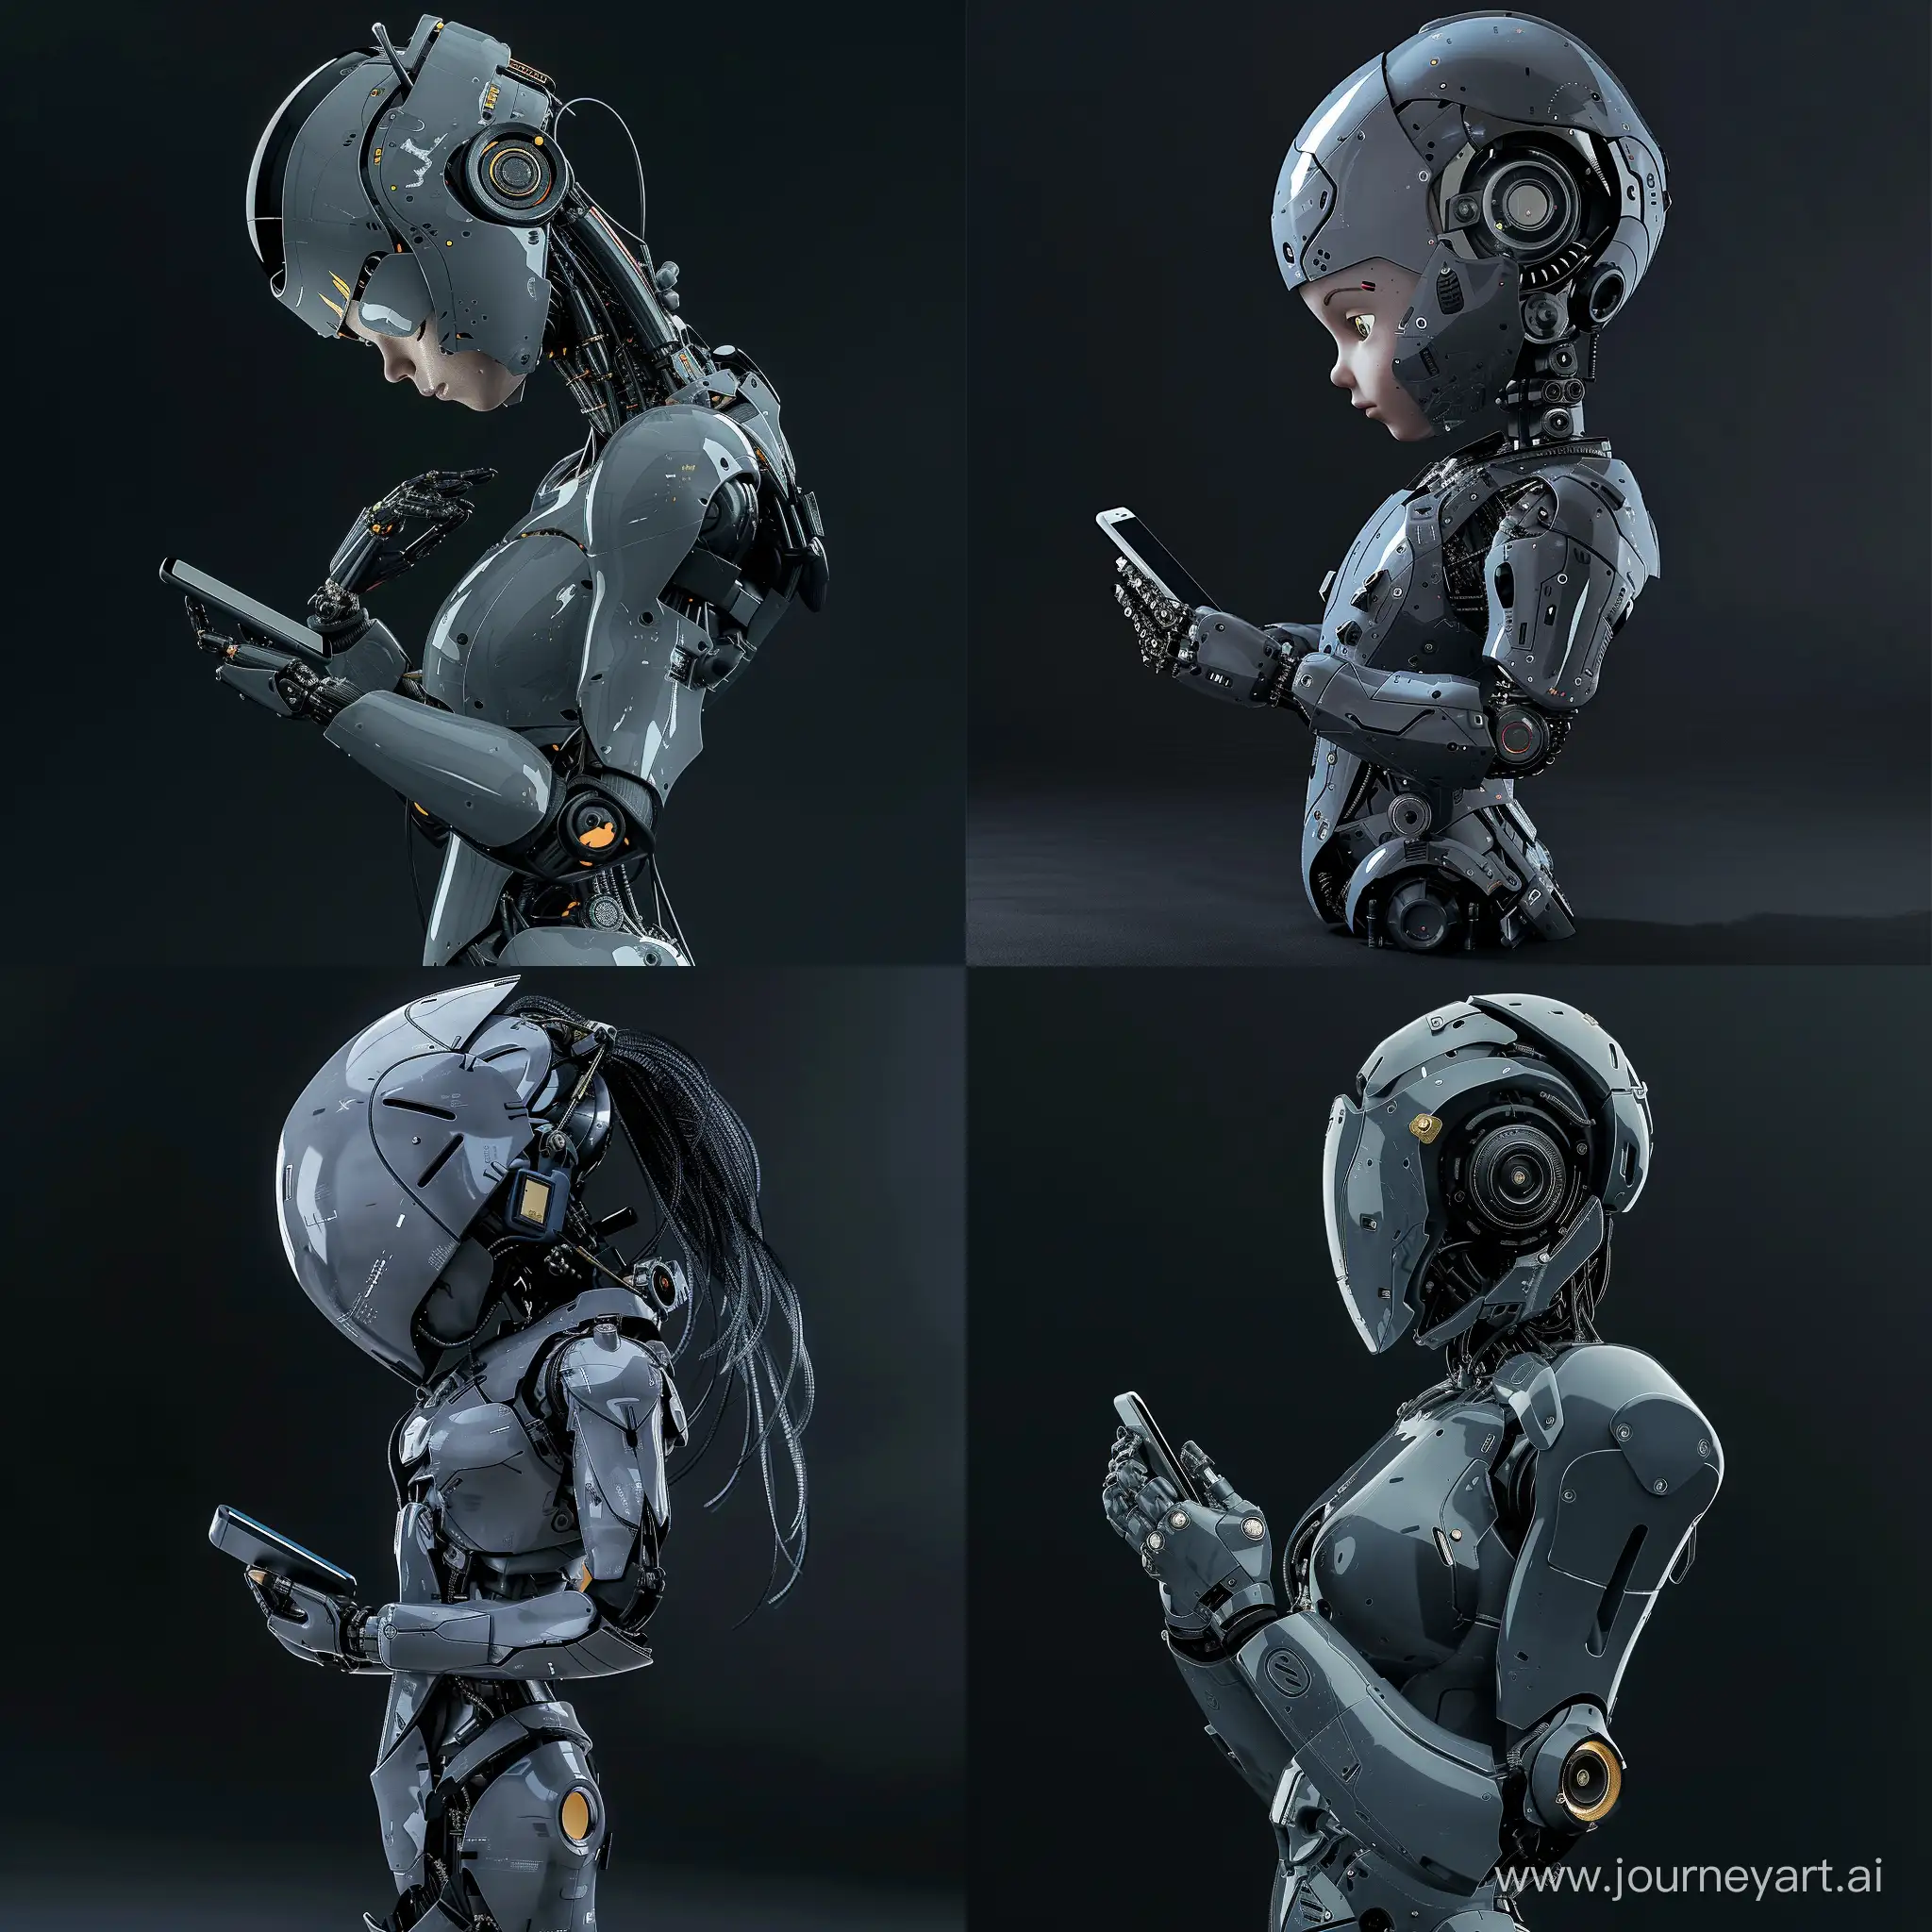 A female robot is cute, made of dark gray metal, standing half sideways
and holding a phone in her hand, cyberpunk style, futuristic style, on a dark background